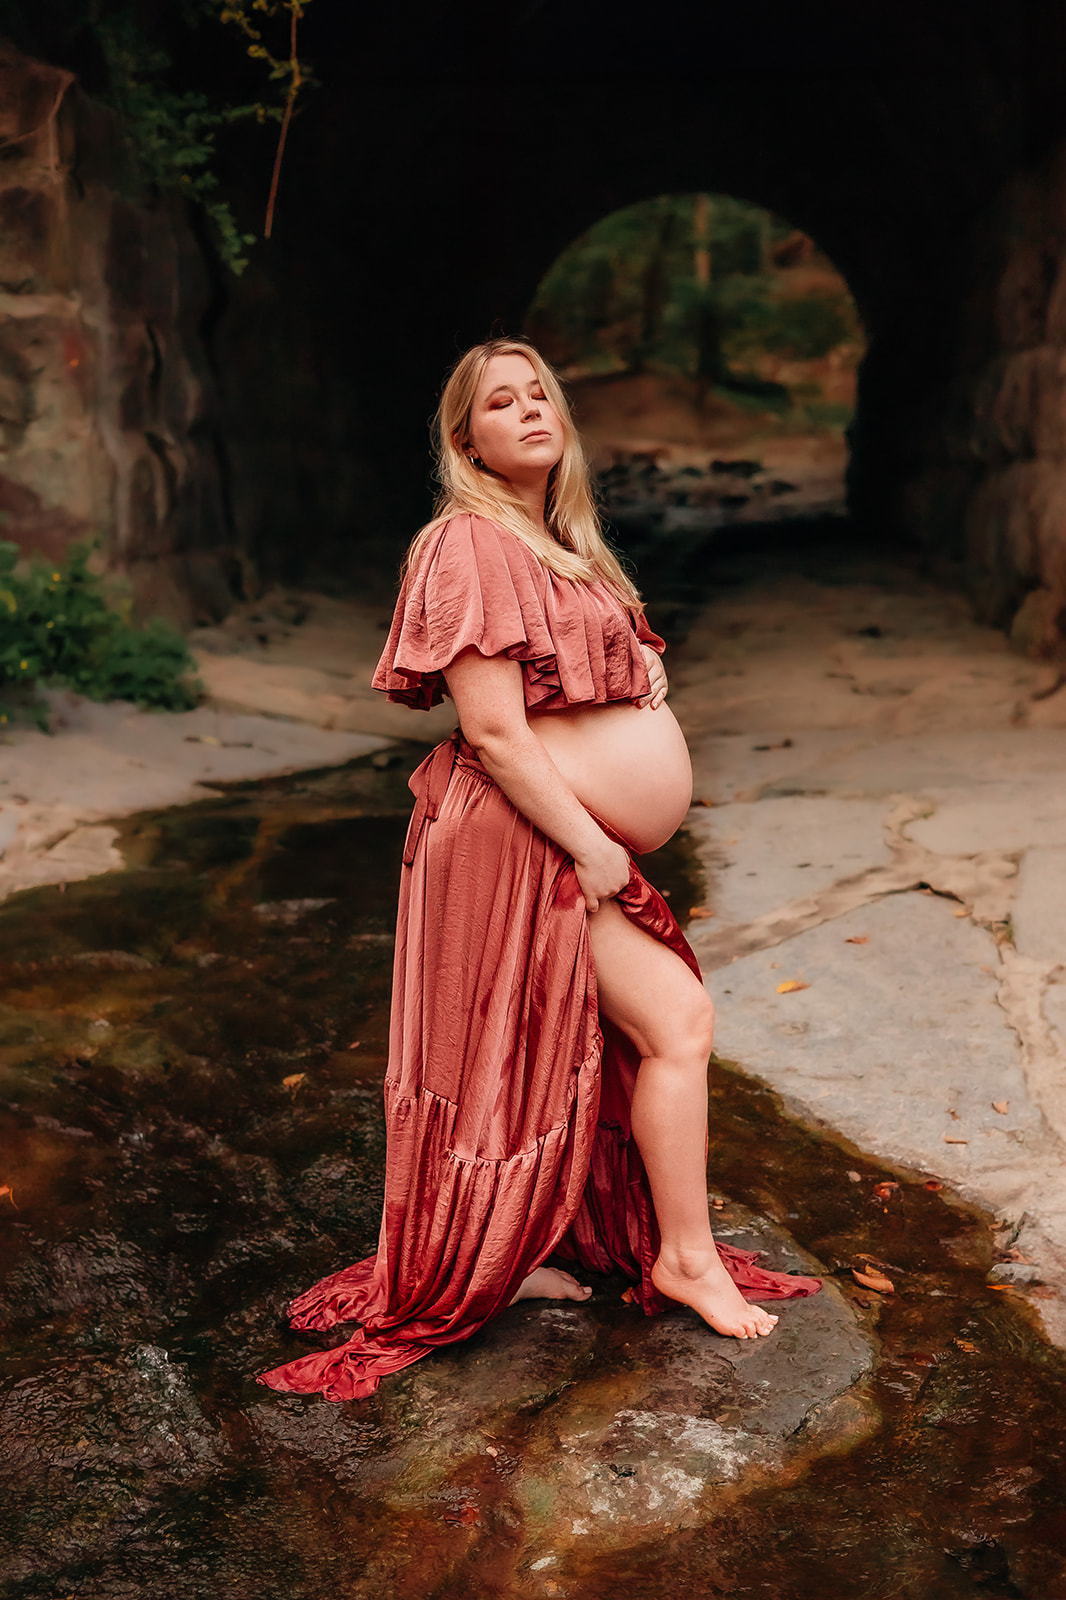 Pregnant mom in a mauve dress poses gracefully in front of a tunnel. Her eyes are closed, and she tilts her head upward, creating a serene and contemplative moment. The soft glow of the tunnel's light enhances the beauty of the scene, capturing the anticipation and joy of pregnancy.